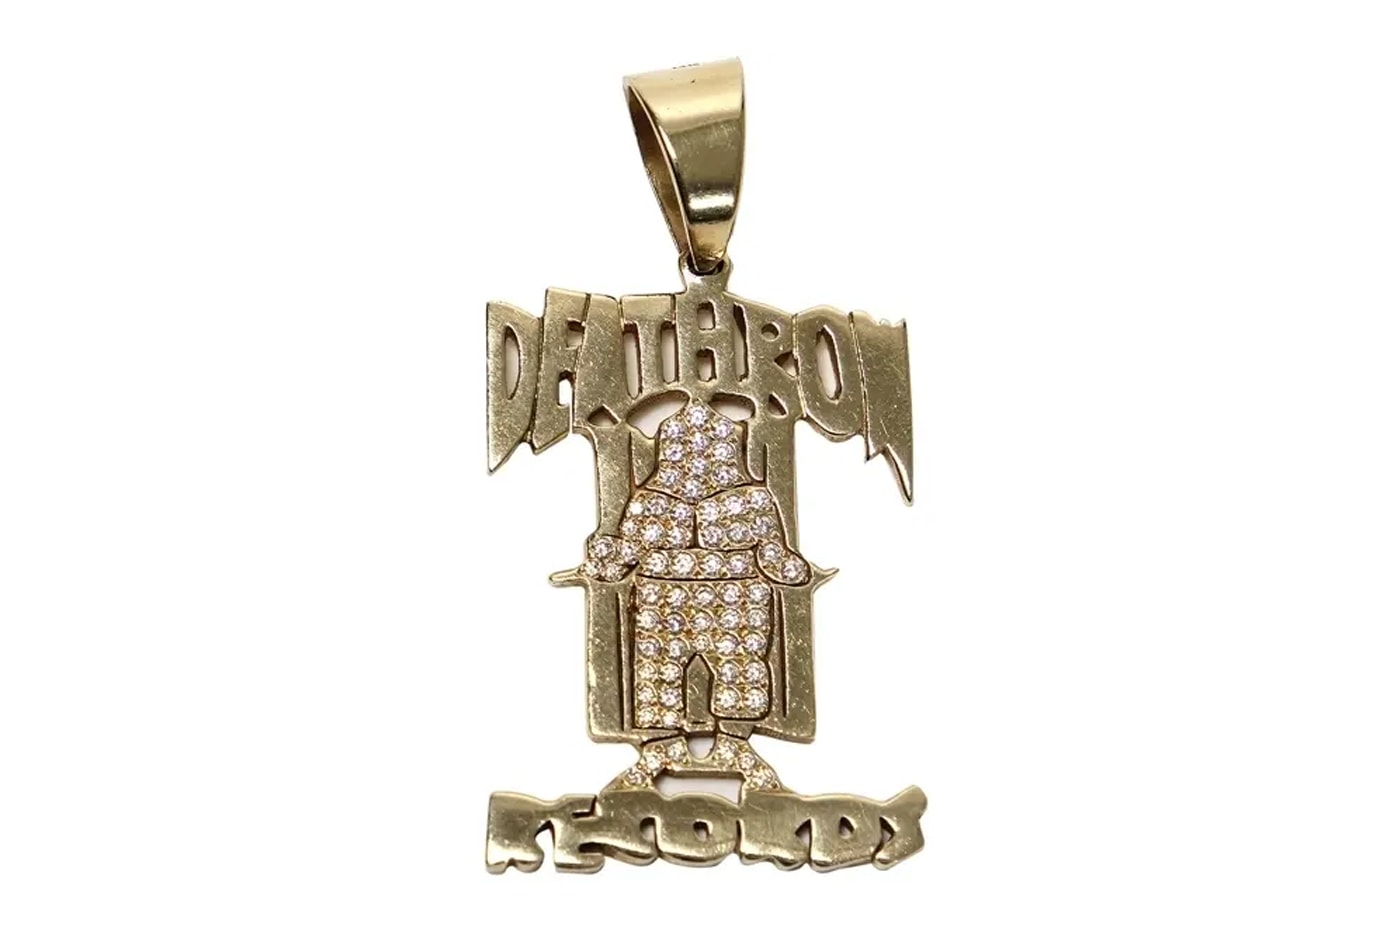 Death Row Records Pendant gold diamond Could Sell 1 million USD auction